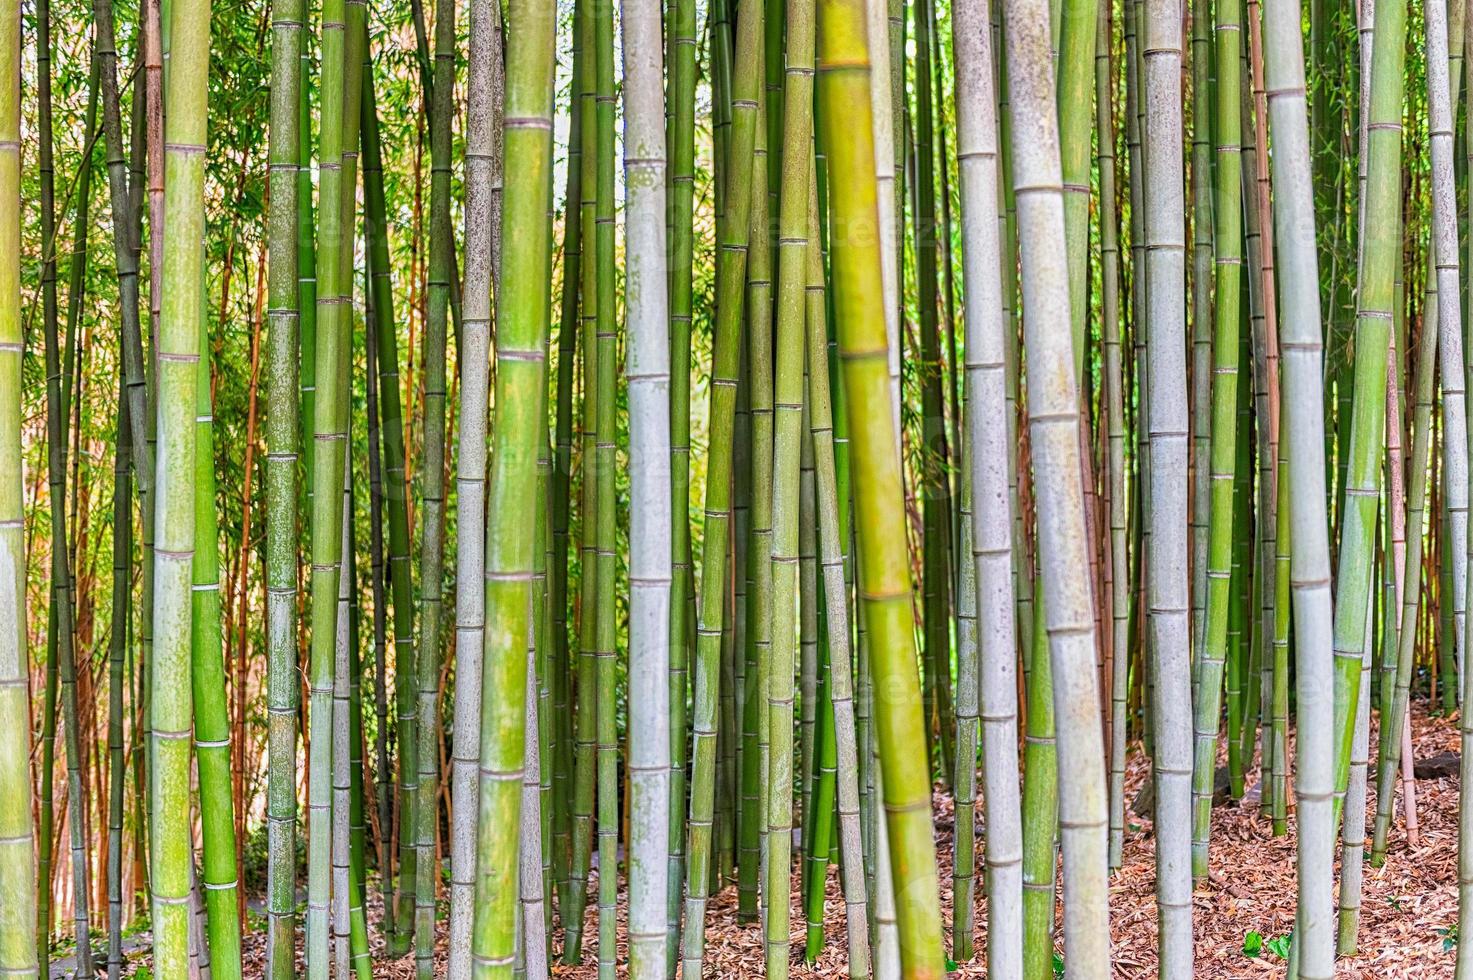 Background with foliage pattern of bamboo trees photo